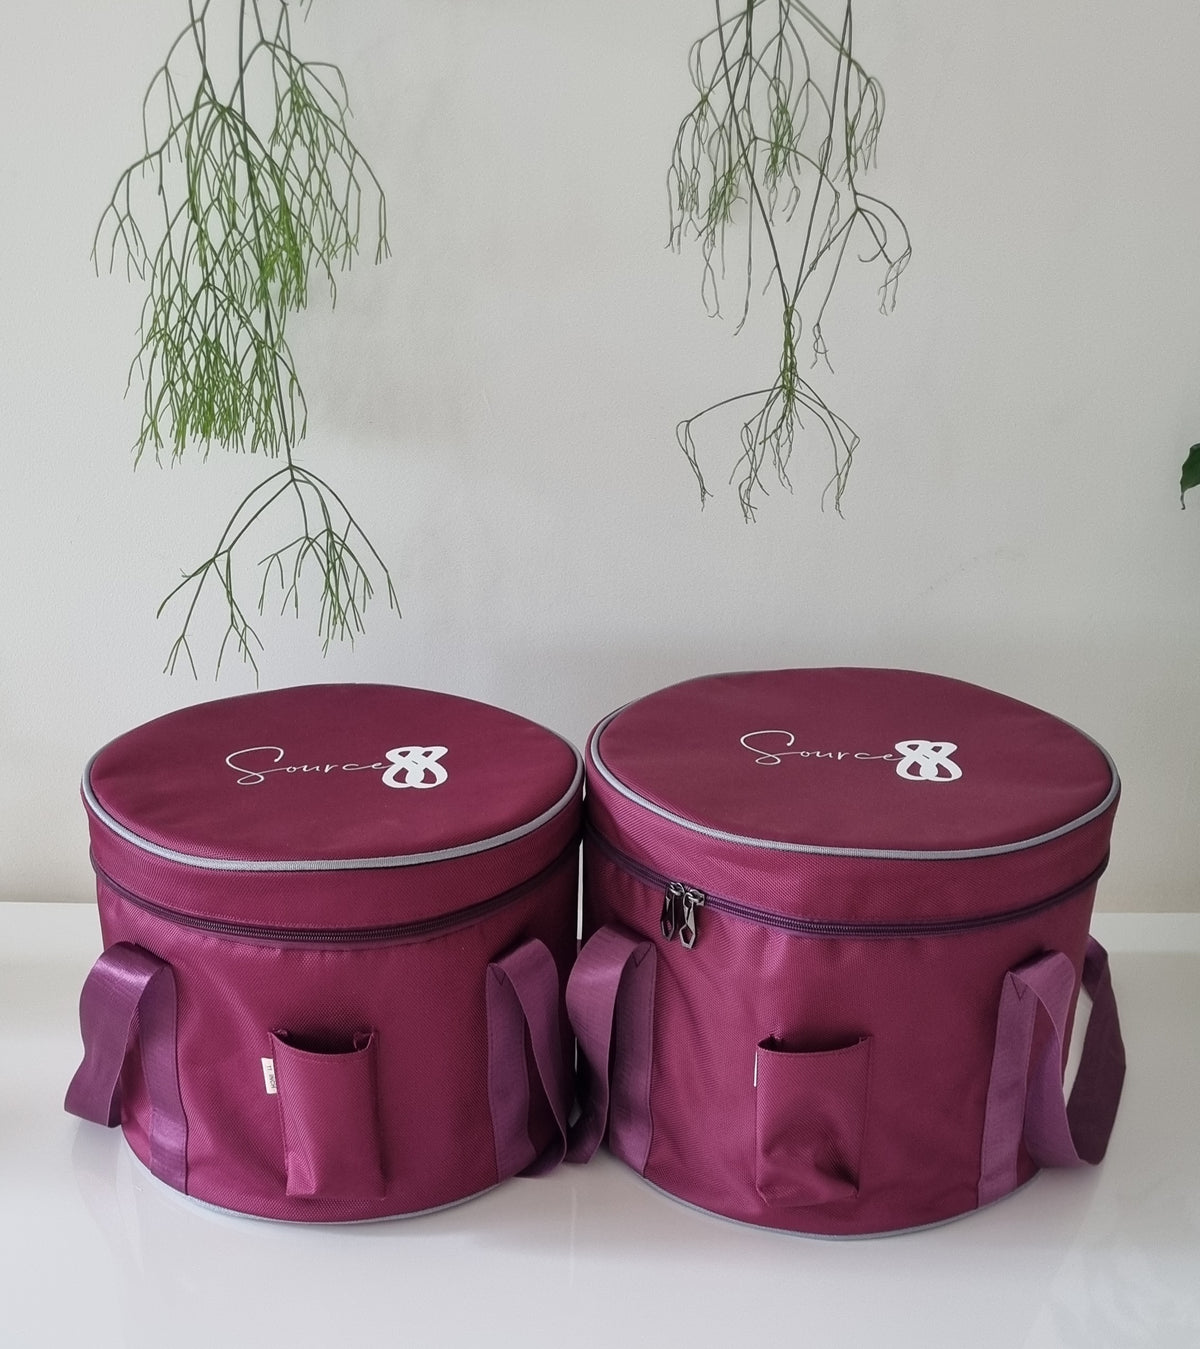 2 x Padded Carry Bags for Full Set of 7 Crystal Singing Bowls with Protective Inserts